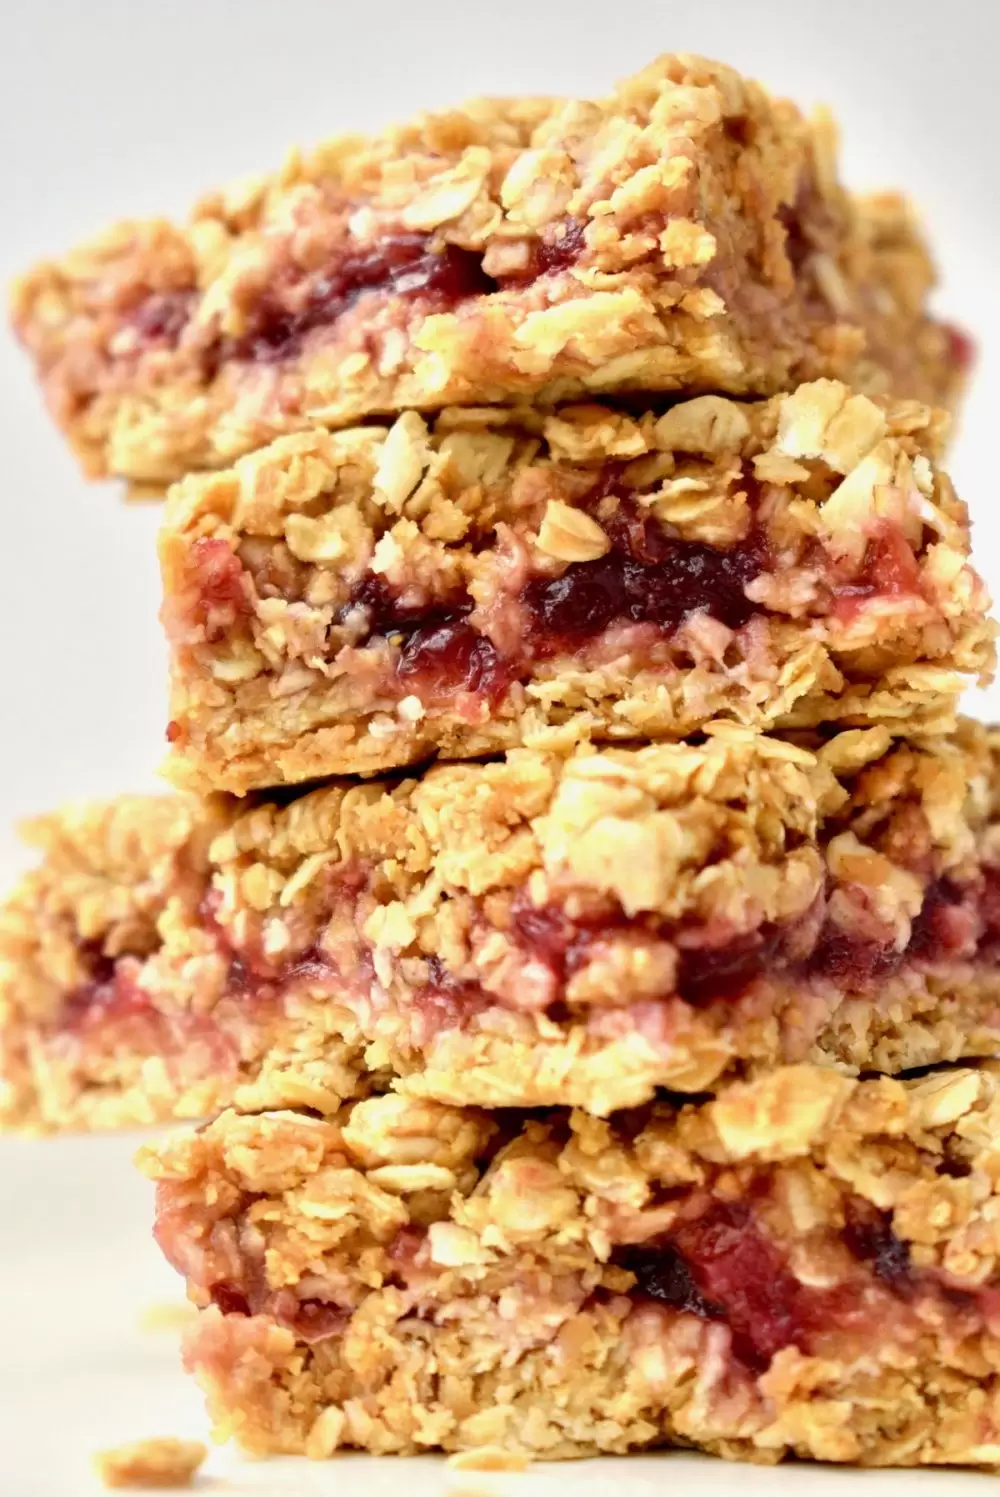 A stack of peanut butter oat bars, filled with jam